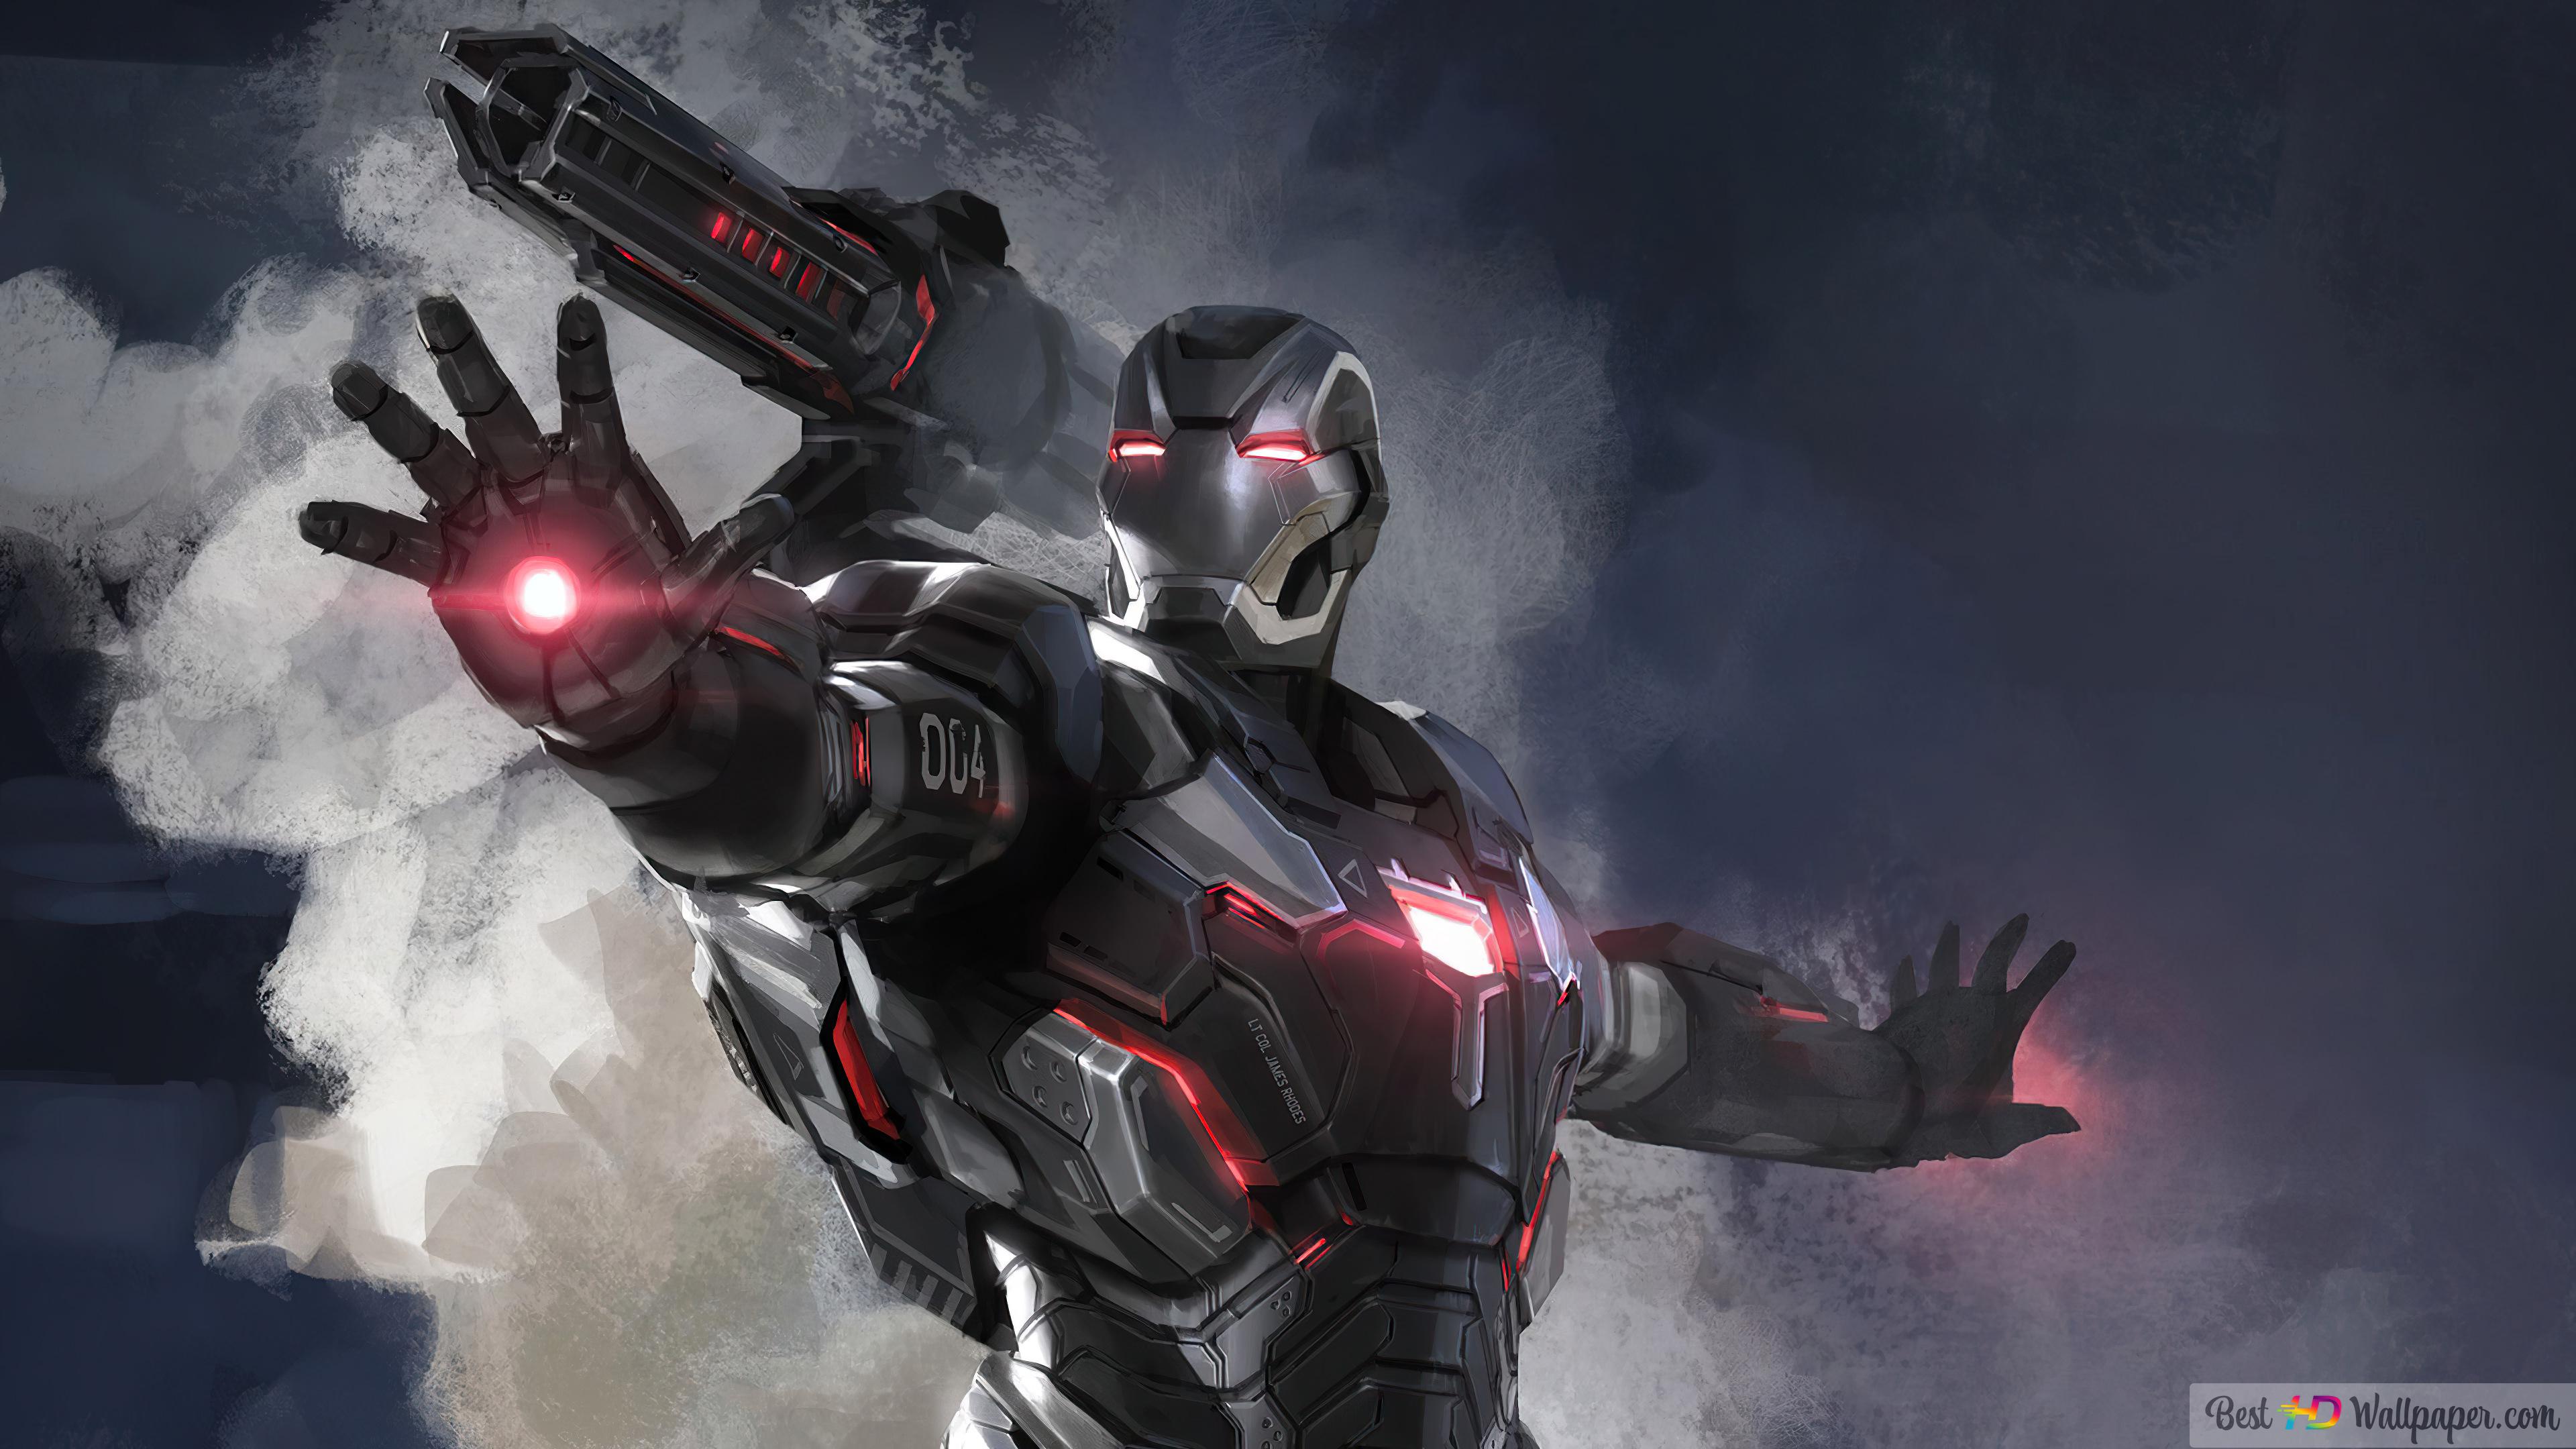 Warmachine In Avengers Endgame Wallpapers